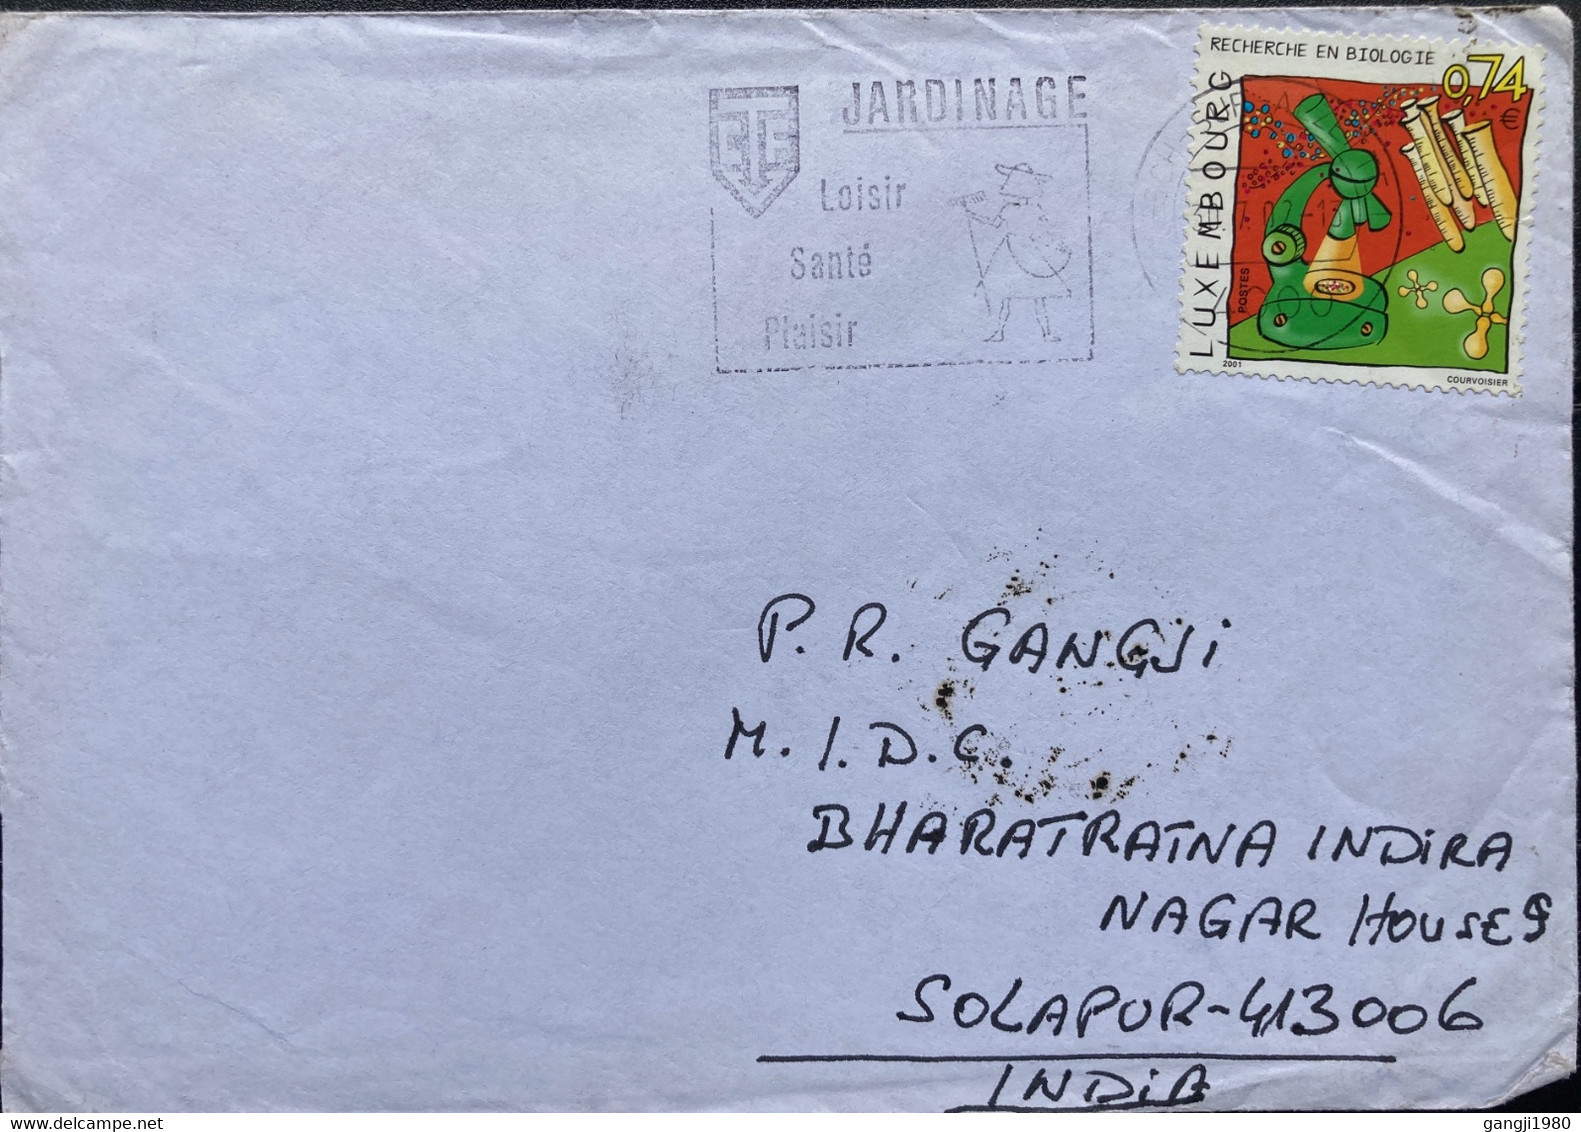 LUXEMBOURG 2002, REASERCH ,MICROSCOPE, LABROTARY ,JARDINAGE LOISIR SANTE PLAISIR ,GARDENING FOR HEALTH, COVER TO INDIA - Cartas & Documentos